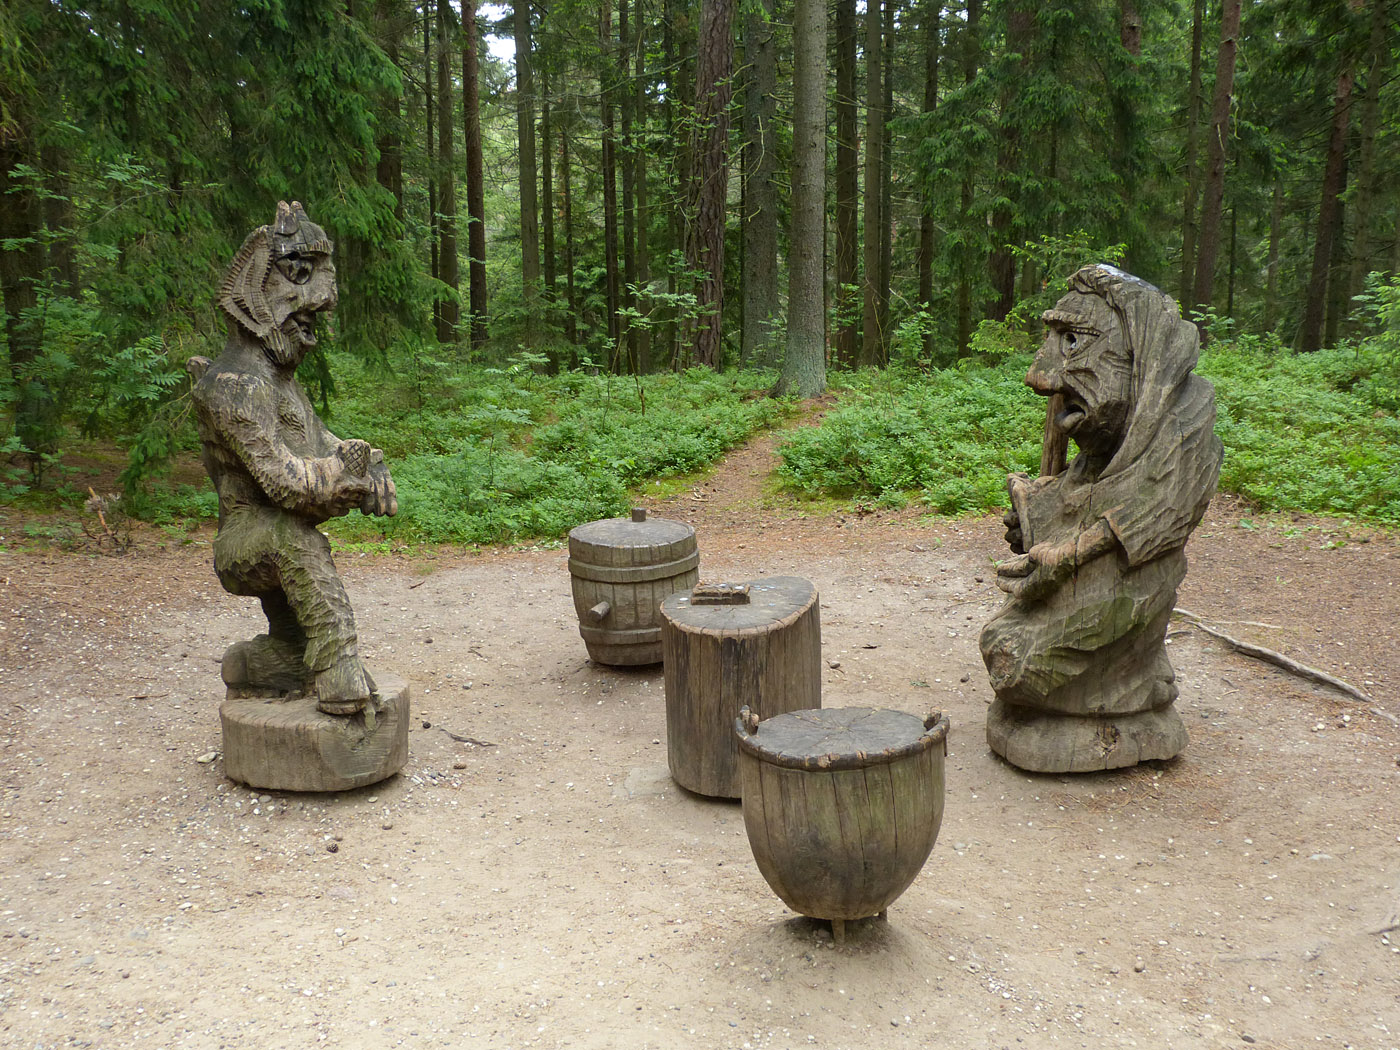 Wood Carvings, Witches Hill, Juodkrante, Lithuania